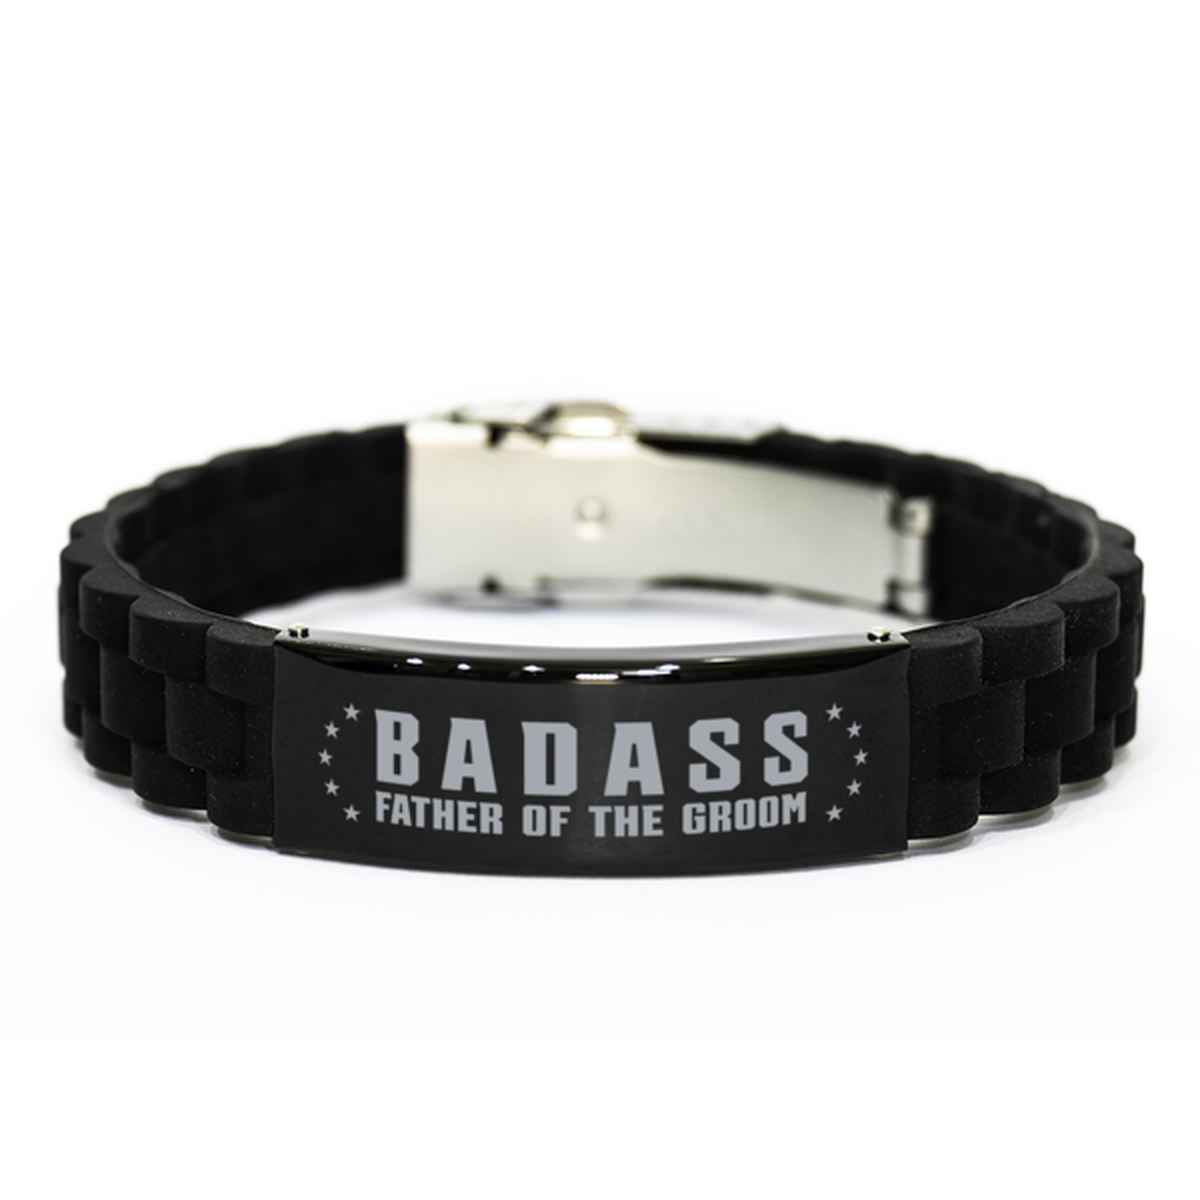 Father of the groom Black Bracelet, Badass Father of the Broom, Funny Family Gifts For Father of the groom From Son Daughter